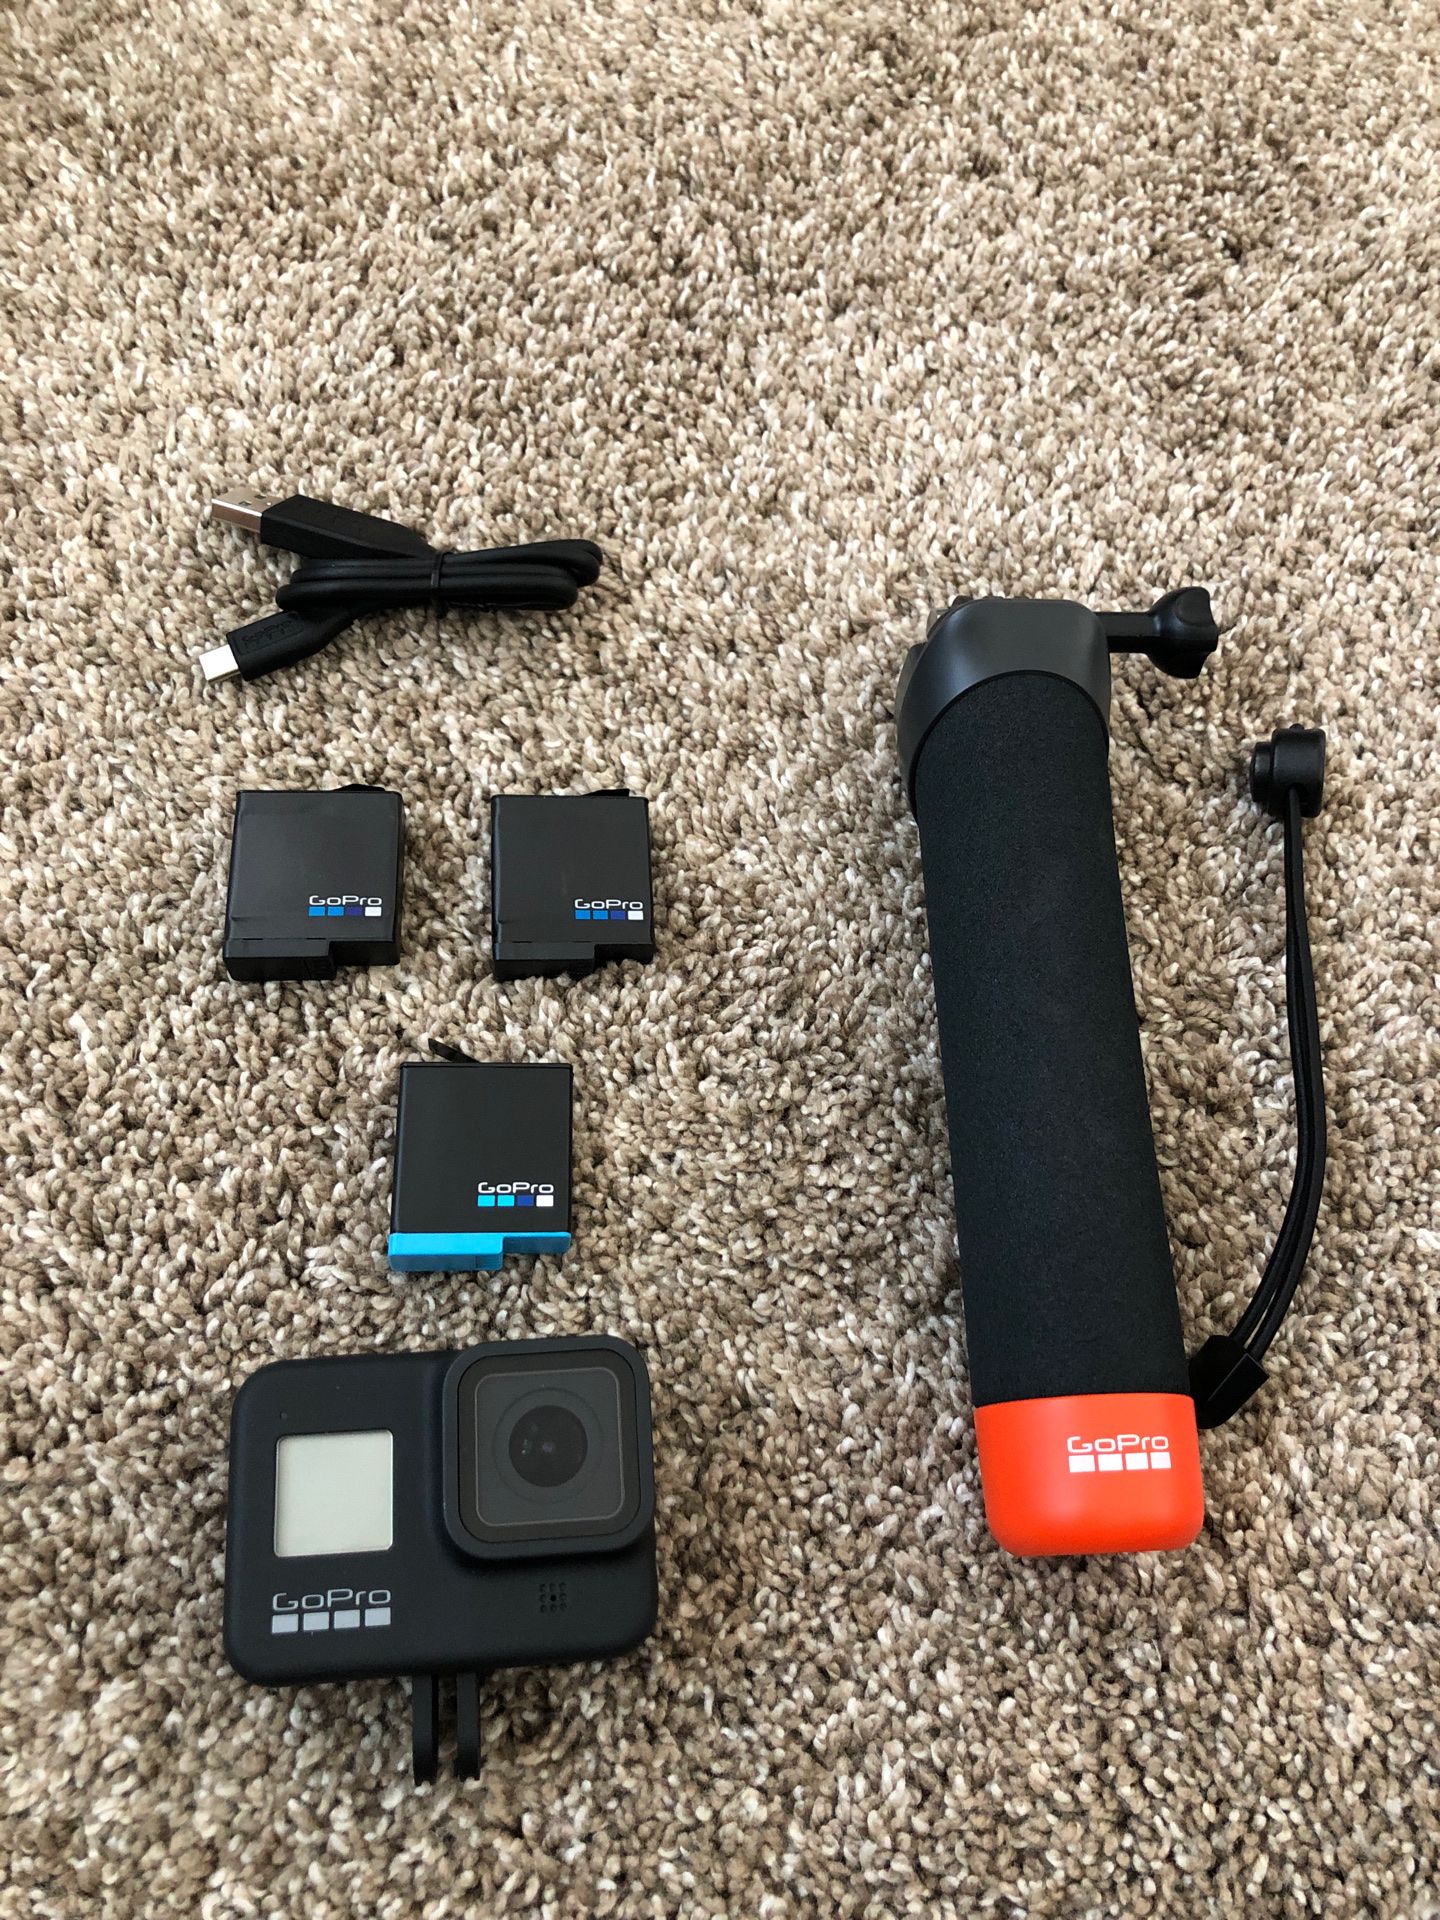 Gopro 8 black with extra batteries (4 total)